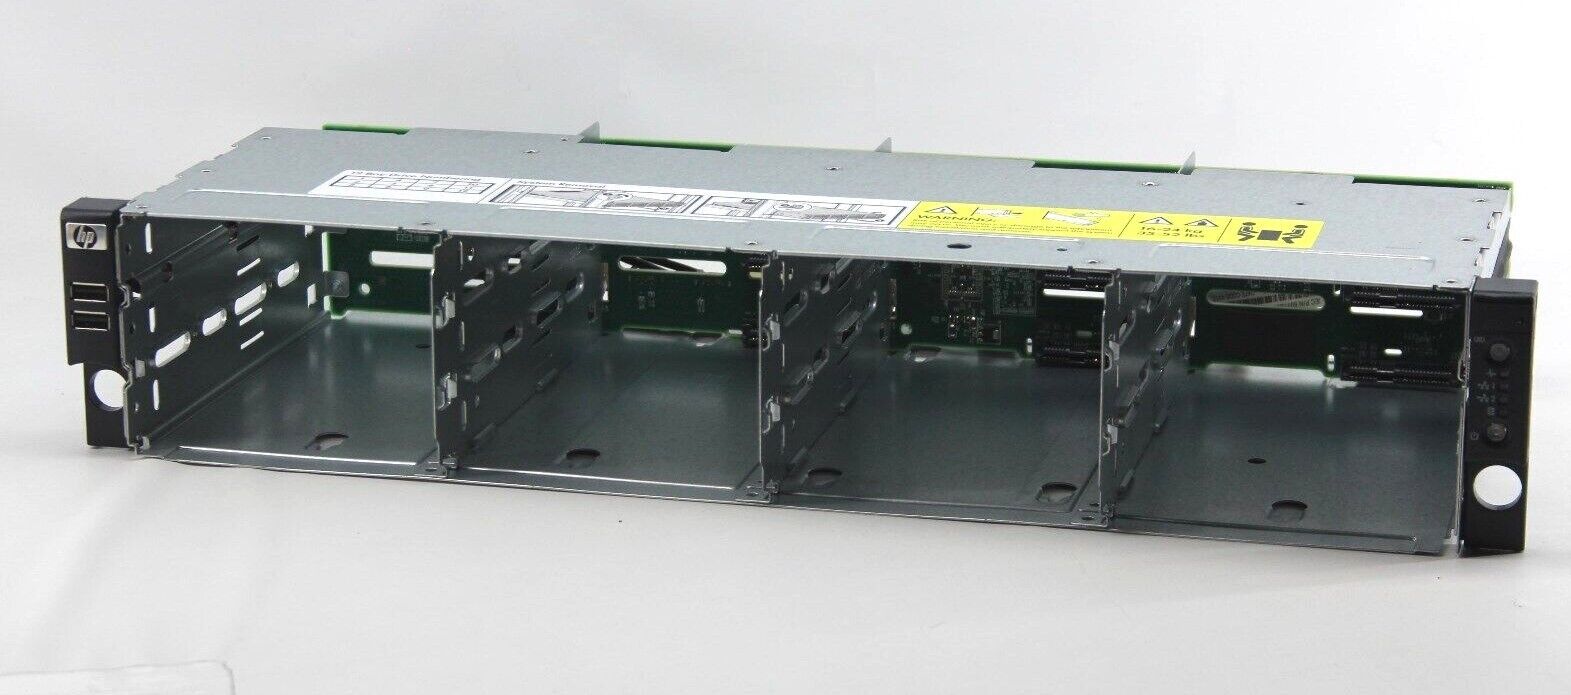 507254-001 HP Drive Cage Assembly 2U 12HDD for HP ProLiant DL180 G6 Server NEW